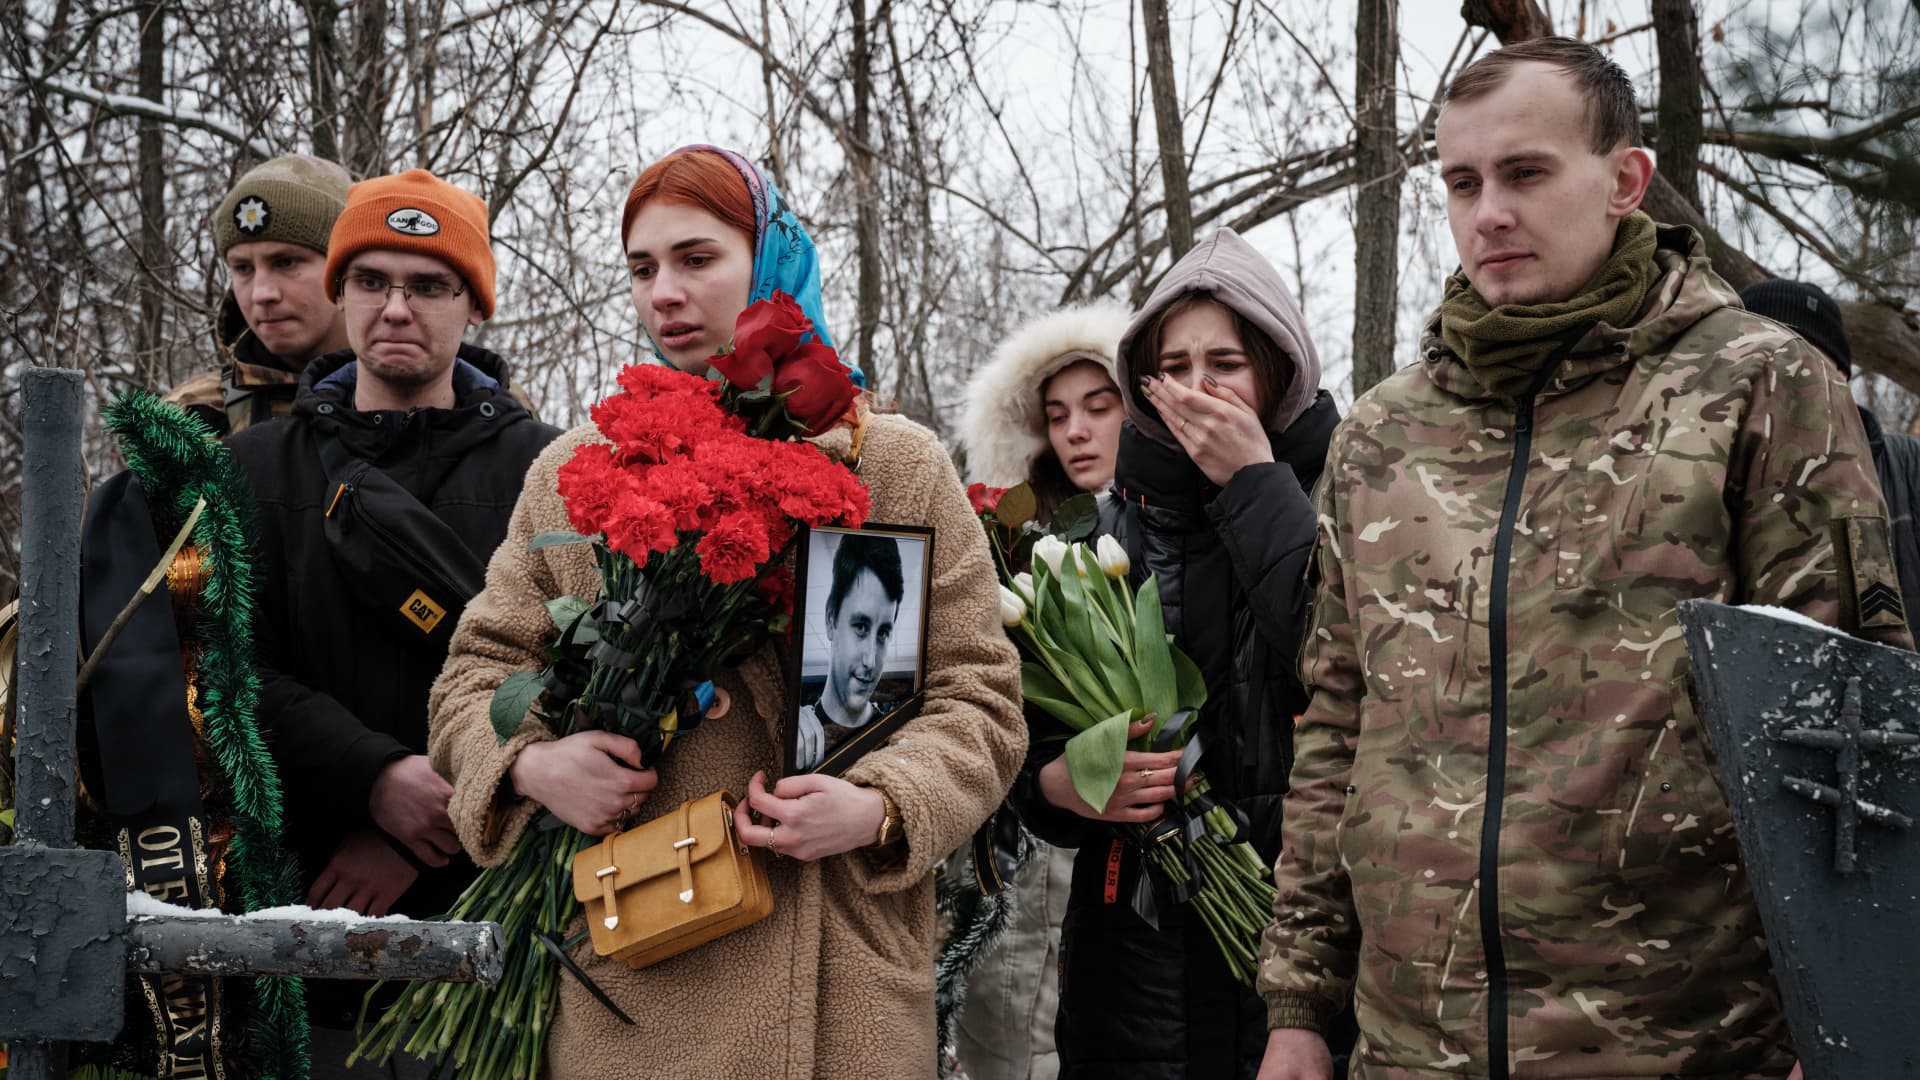 Kateryna Avdeyeva (C), holds a portrait of her late friend, Ukrainian serviceman of the Azov battalion killed in action in Bakhmut, 28-year-old orphan Oleksandr Korovniy, as she attends his funeral ceremony at a cemetery in Sloviansk on January 30, 2023, amid the Russian invasion of Ukraine. 